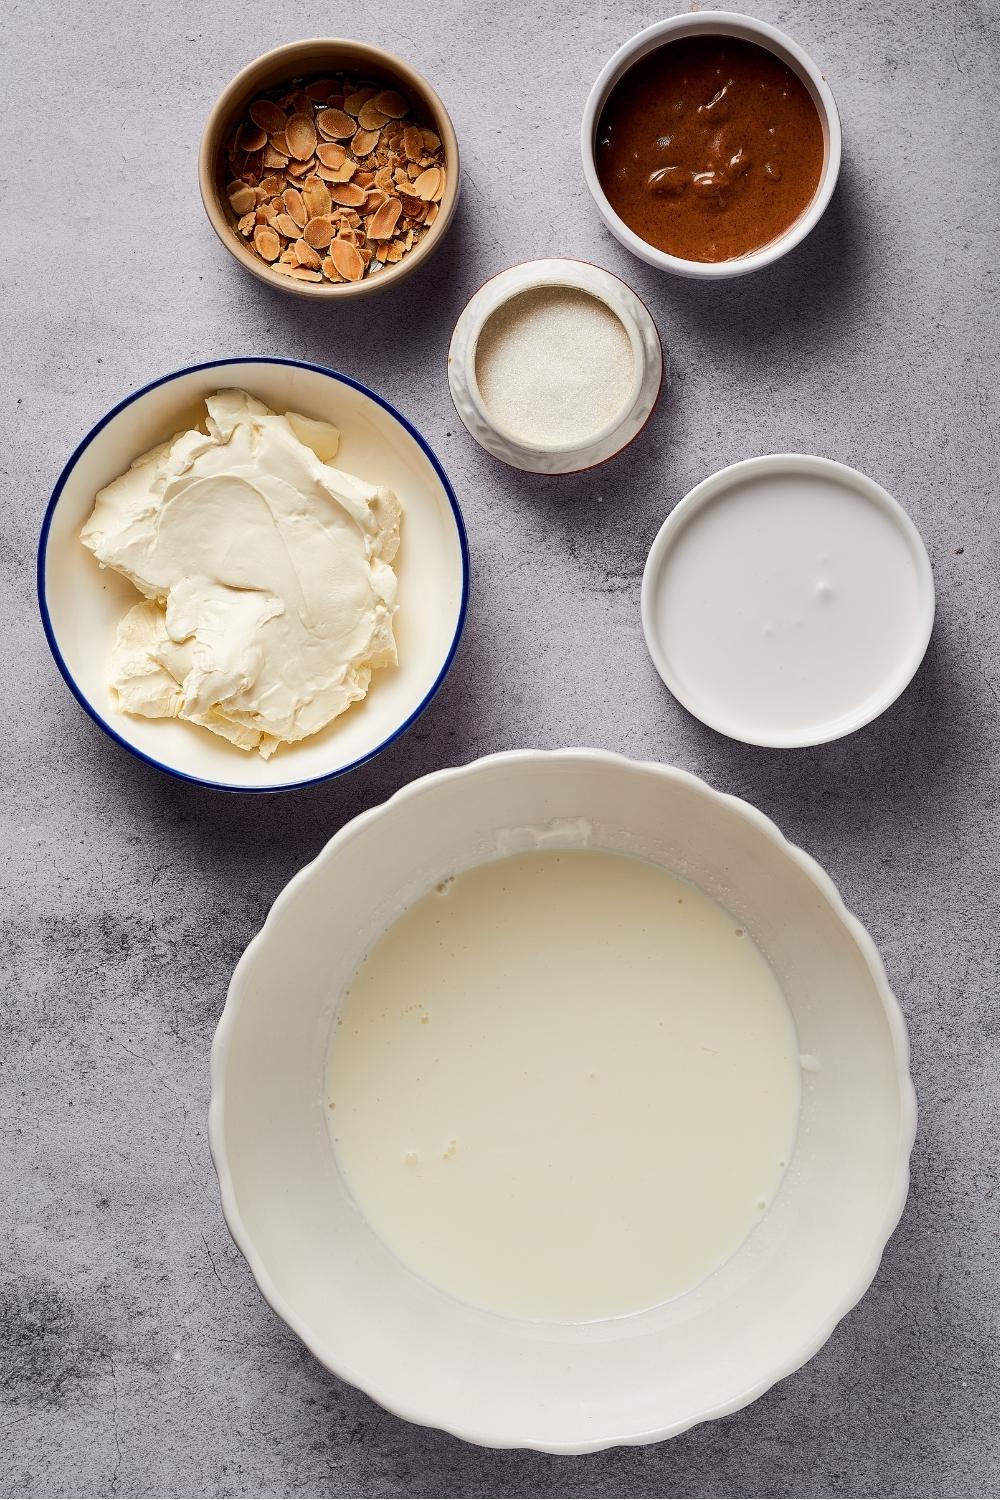 A bowl of coconut milk, a bowl of almond butter, a bowl of erythritol, a bowl of cream cheese, and a bowl of heavy cream all on a grey counter.